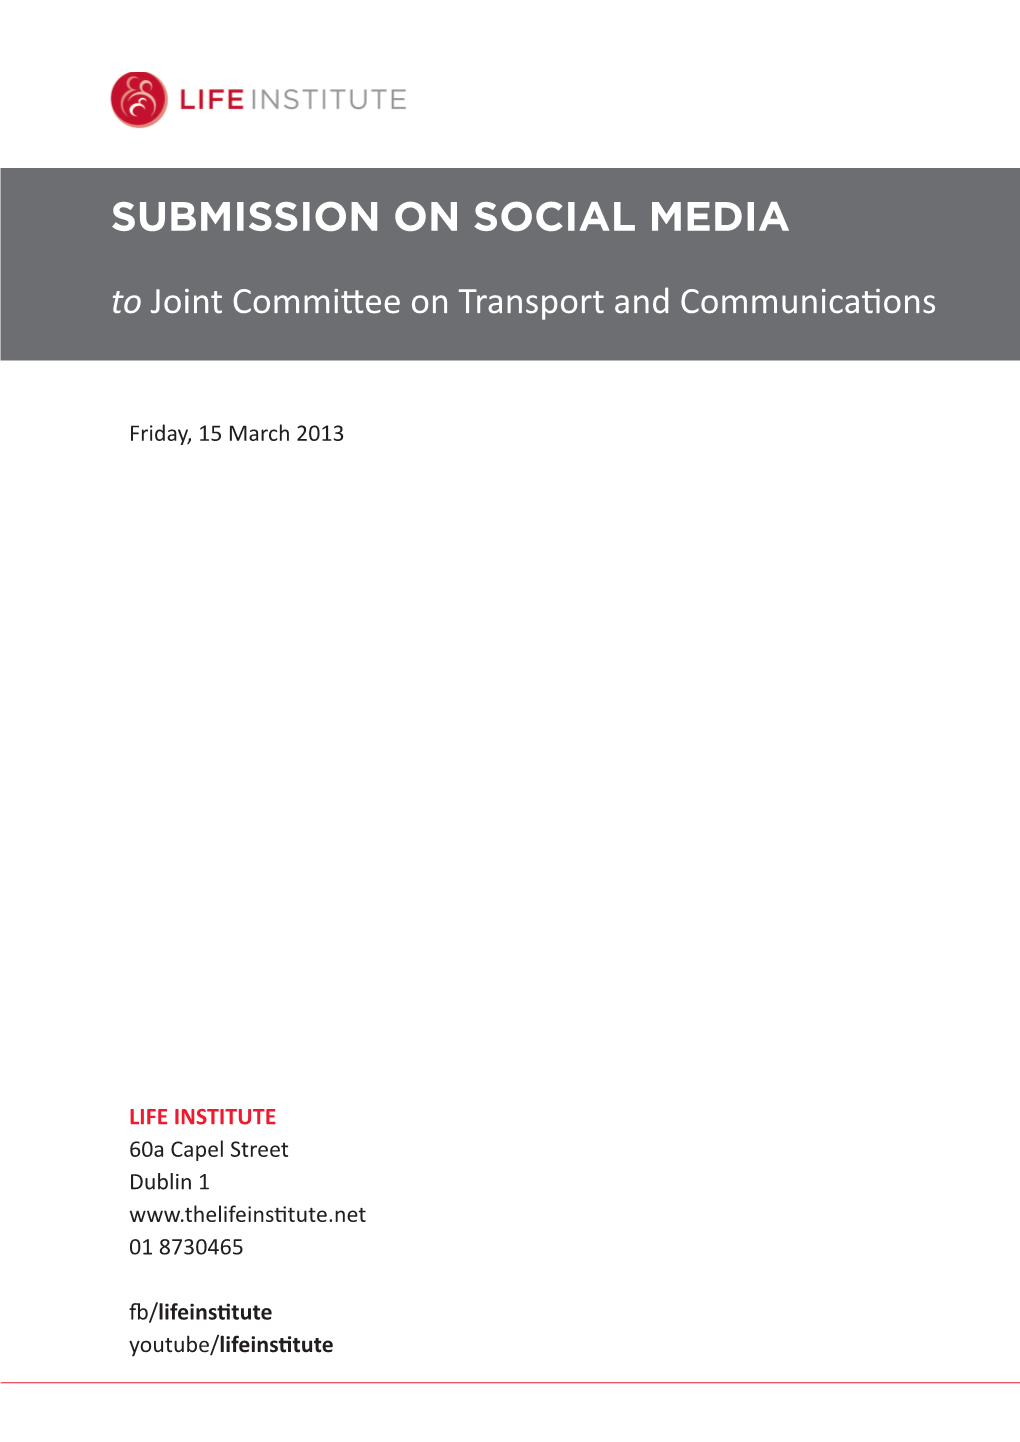 SUBMISSION on SOCIAL MEDIA to Joint Commi6ee on Transport and Communica5ons